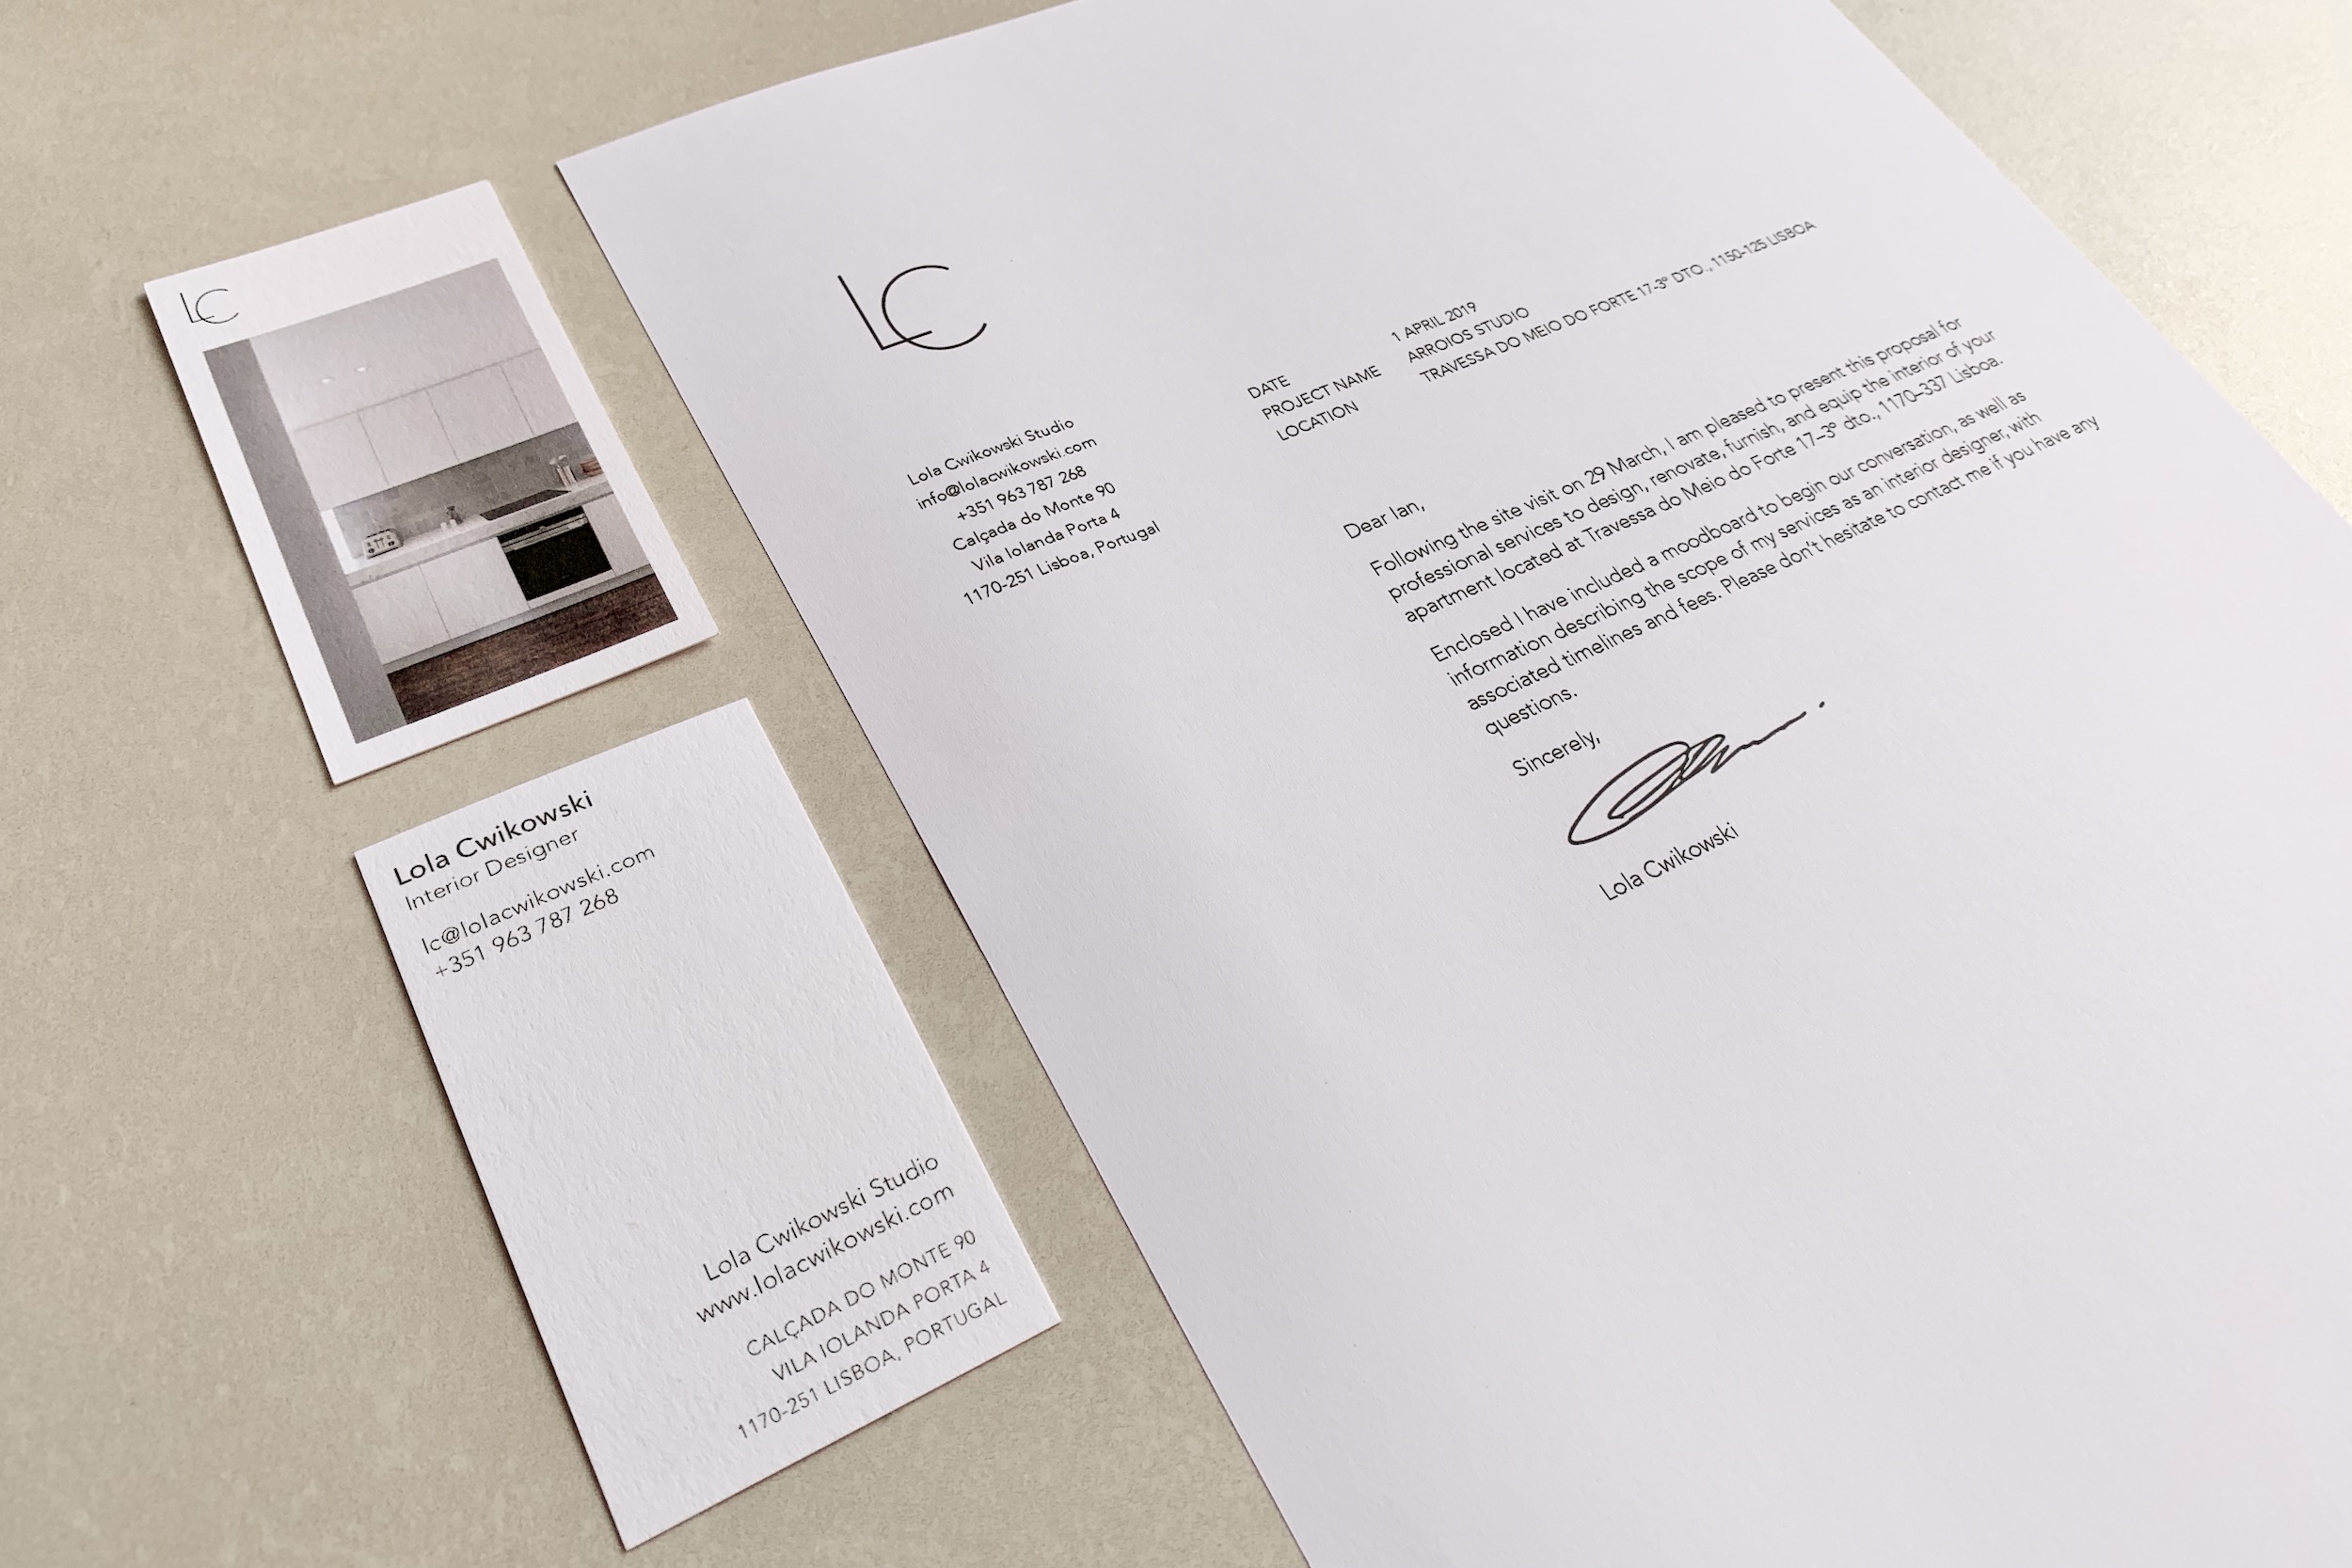 Photo of Lola Cwikowski Interior Design Studio printed materials: business card and template letter.